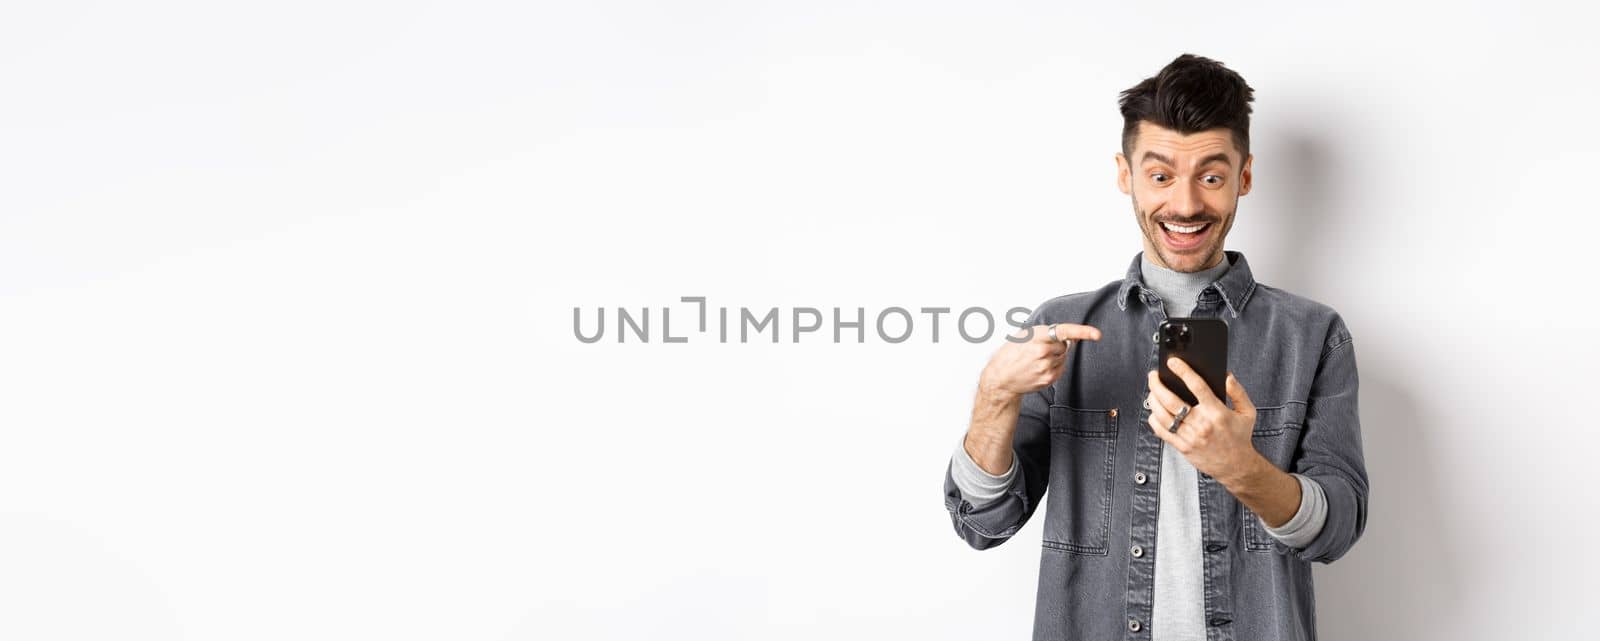 Excited handsome man showing cool news on phone, pointing at smartphone and smiling happy, standing against white background.